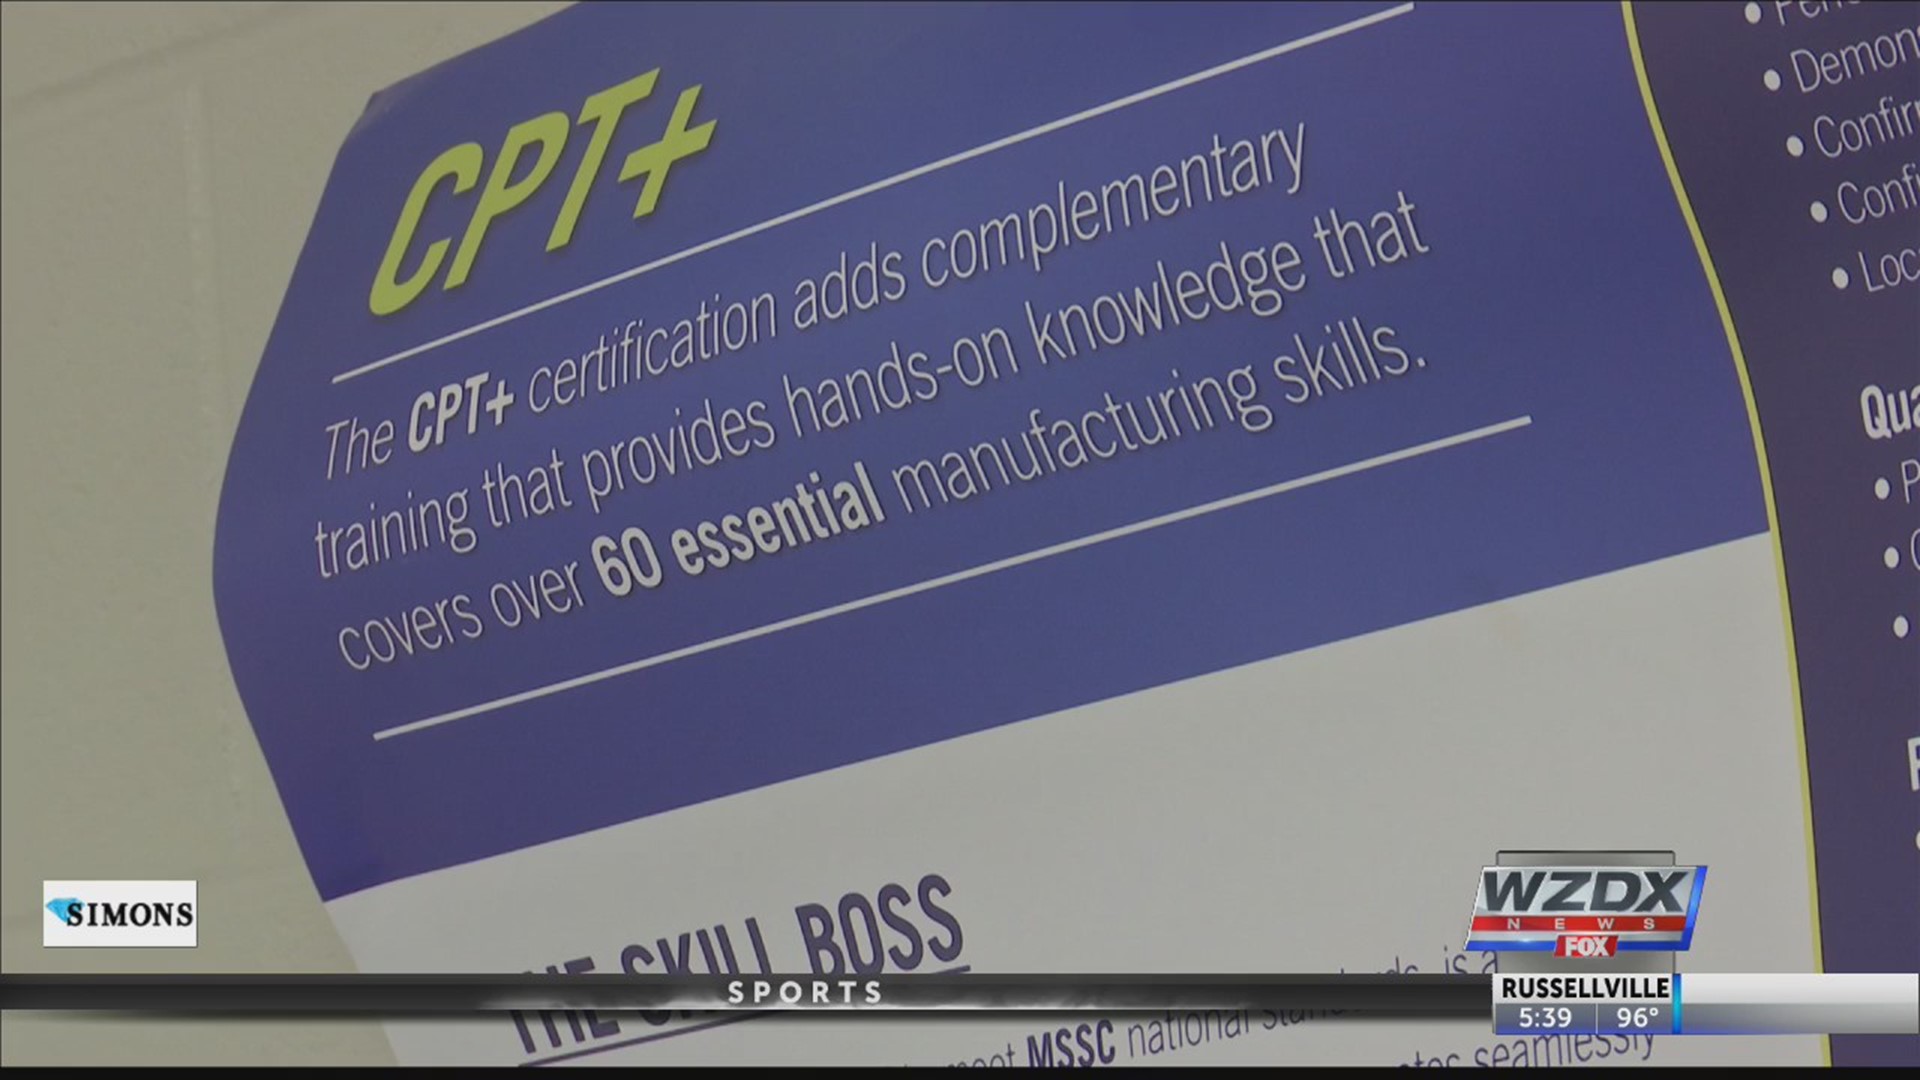 Calhoun is helping individuals find manufacturing jobs with a new, free certification program.